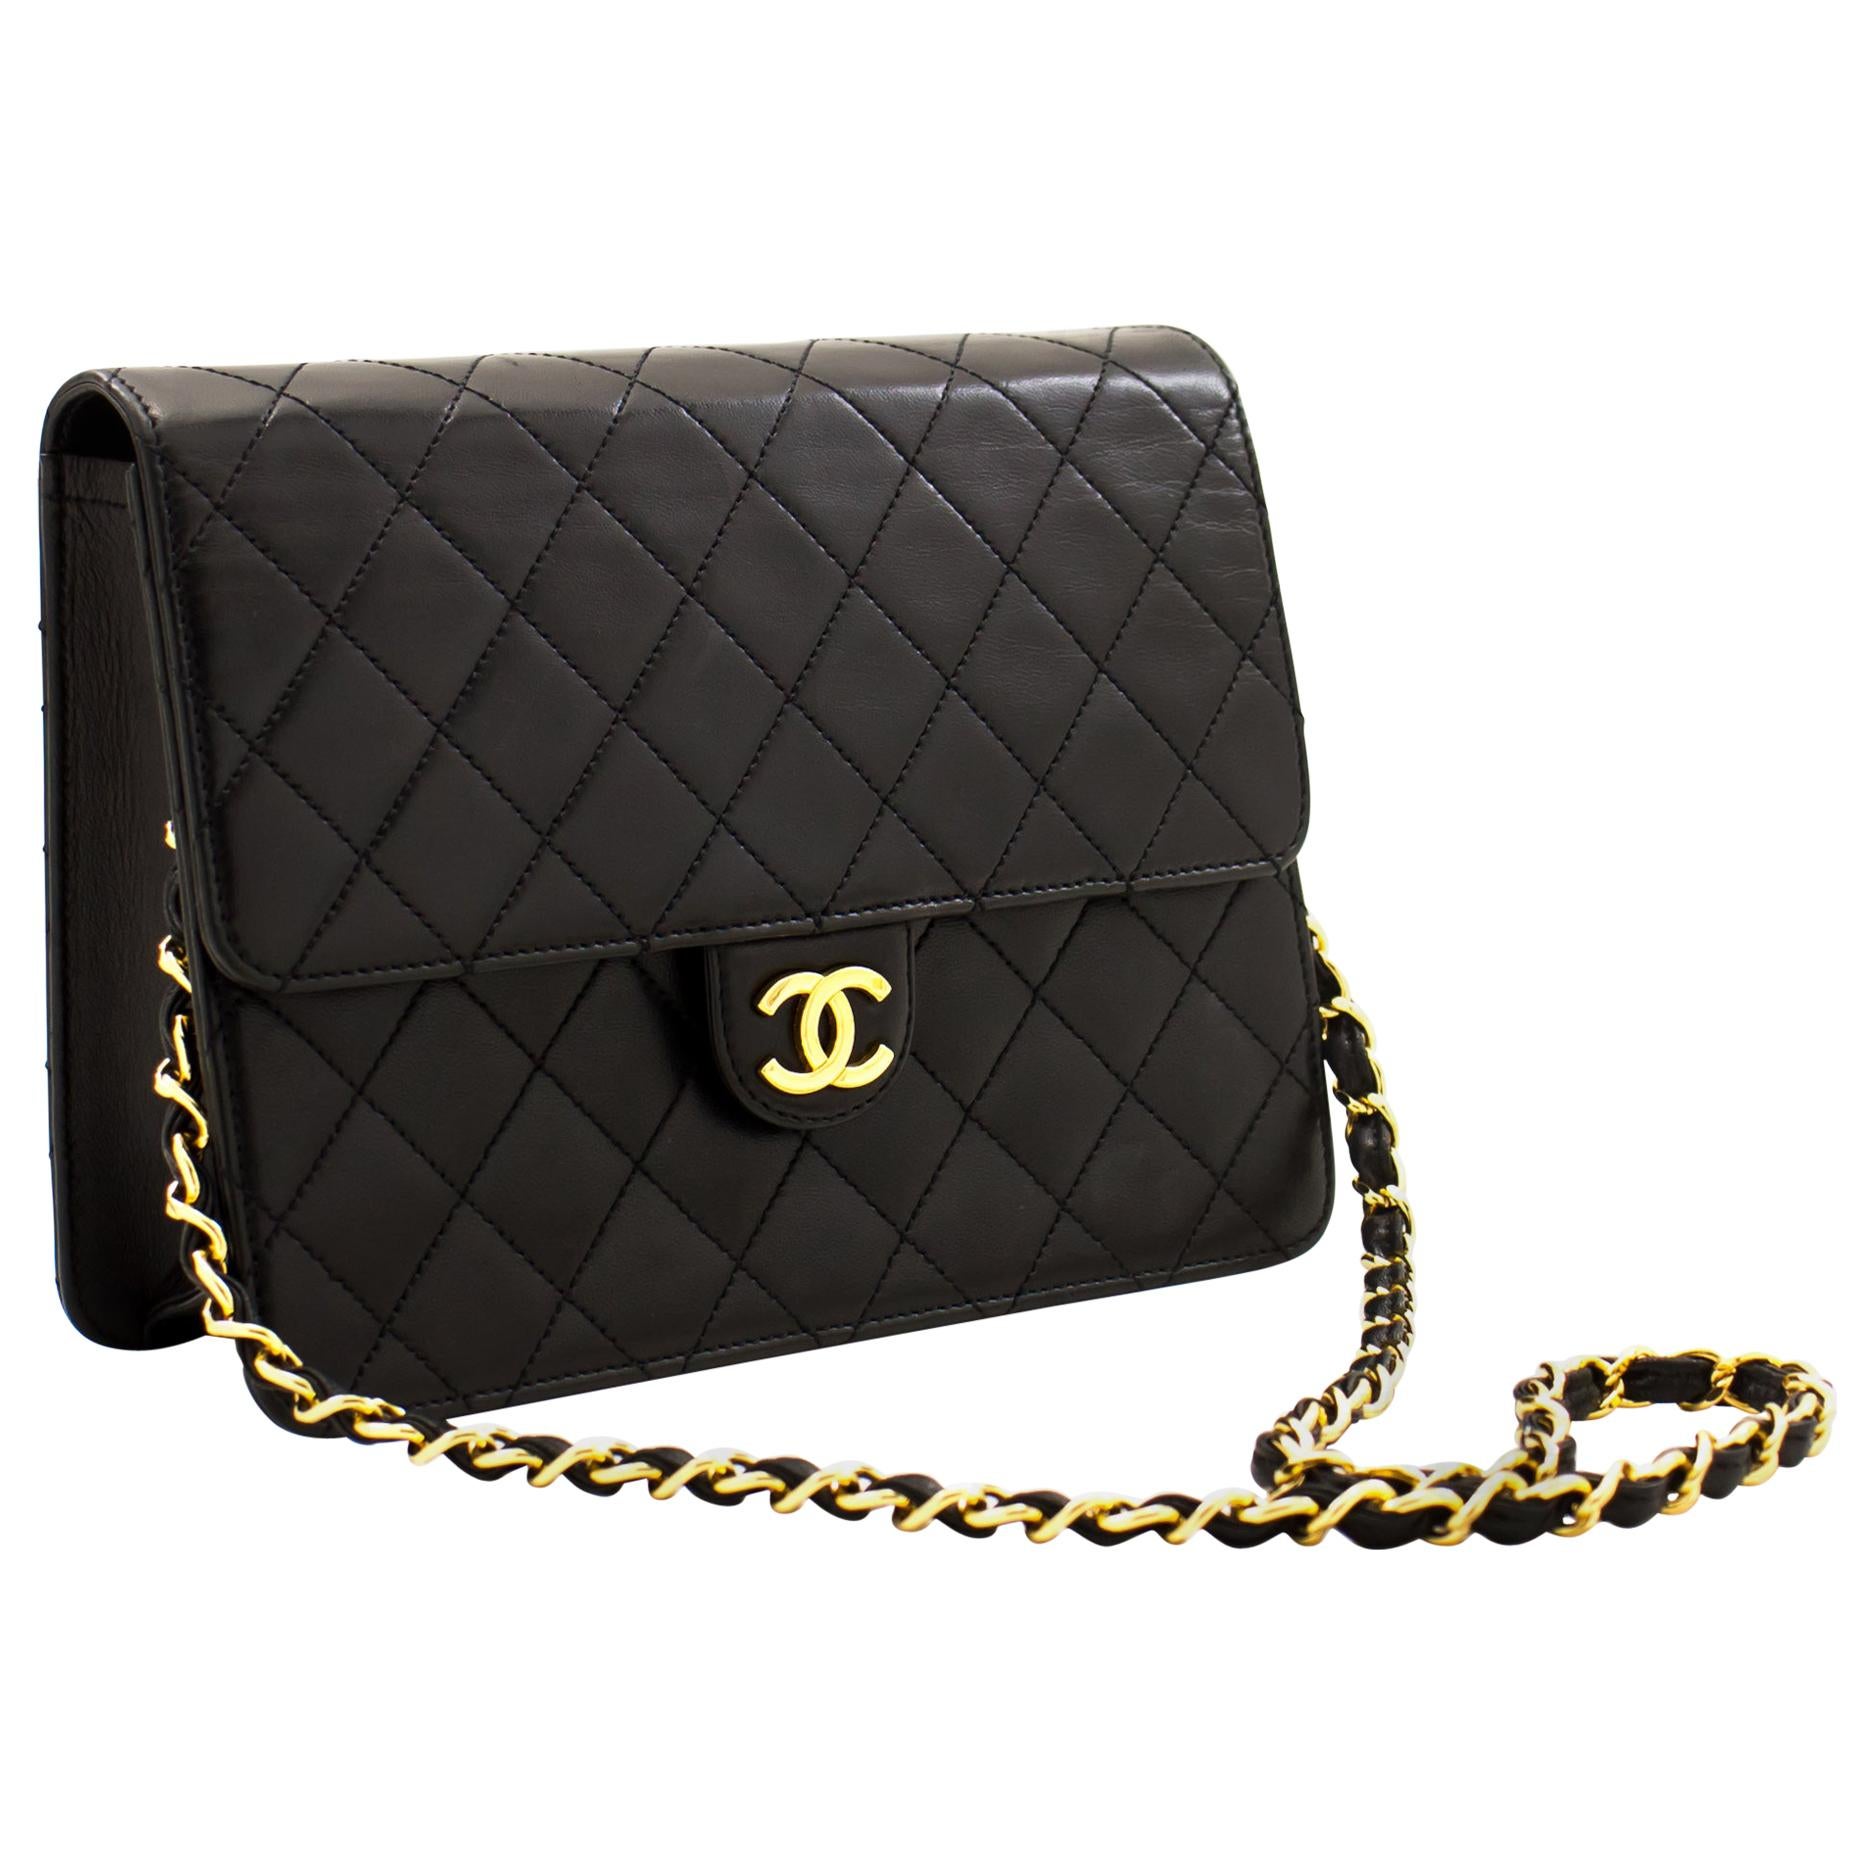 CHANEL Small Chain Shoulder Bag Black Clutch Flap Quilted Lambskin